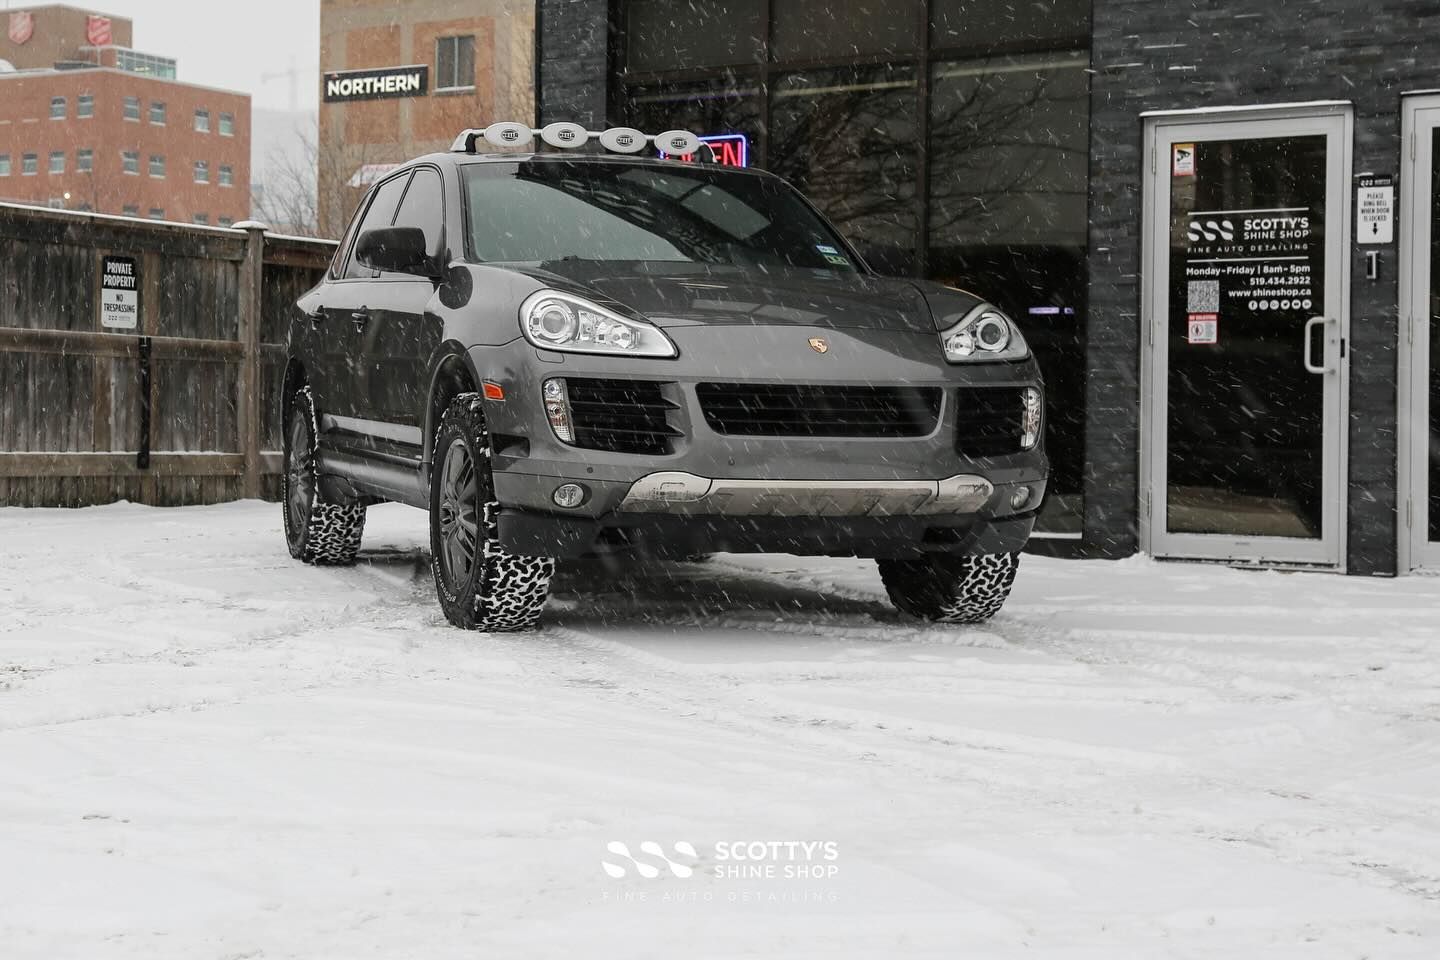 2010 Porsche Cayenne S Transsyberia New Emblems and Decals, Headlight Protection Film London, Ont Canada